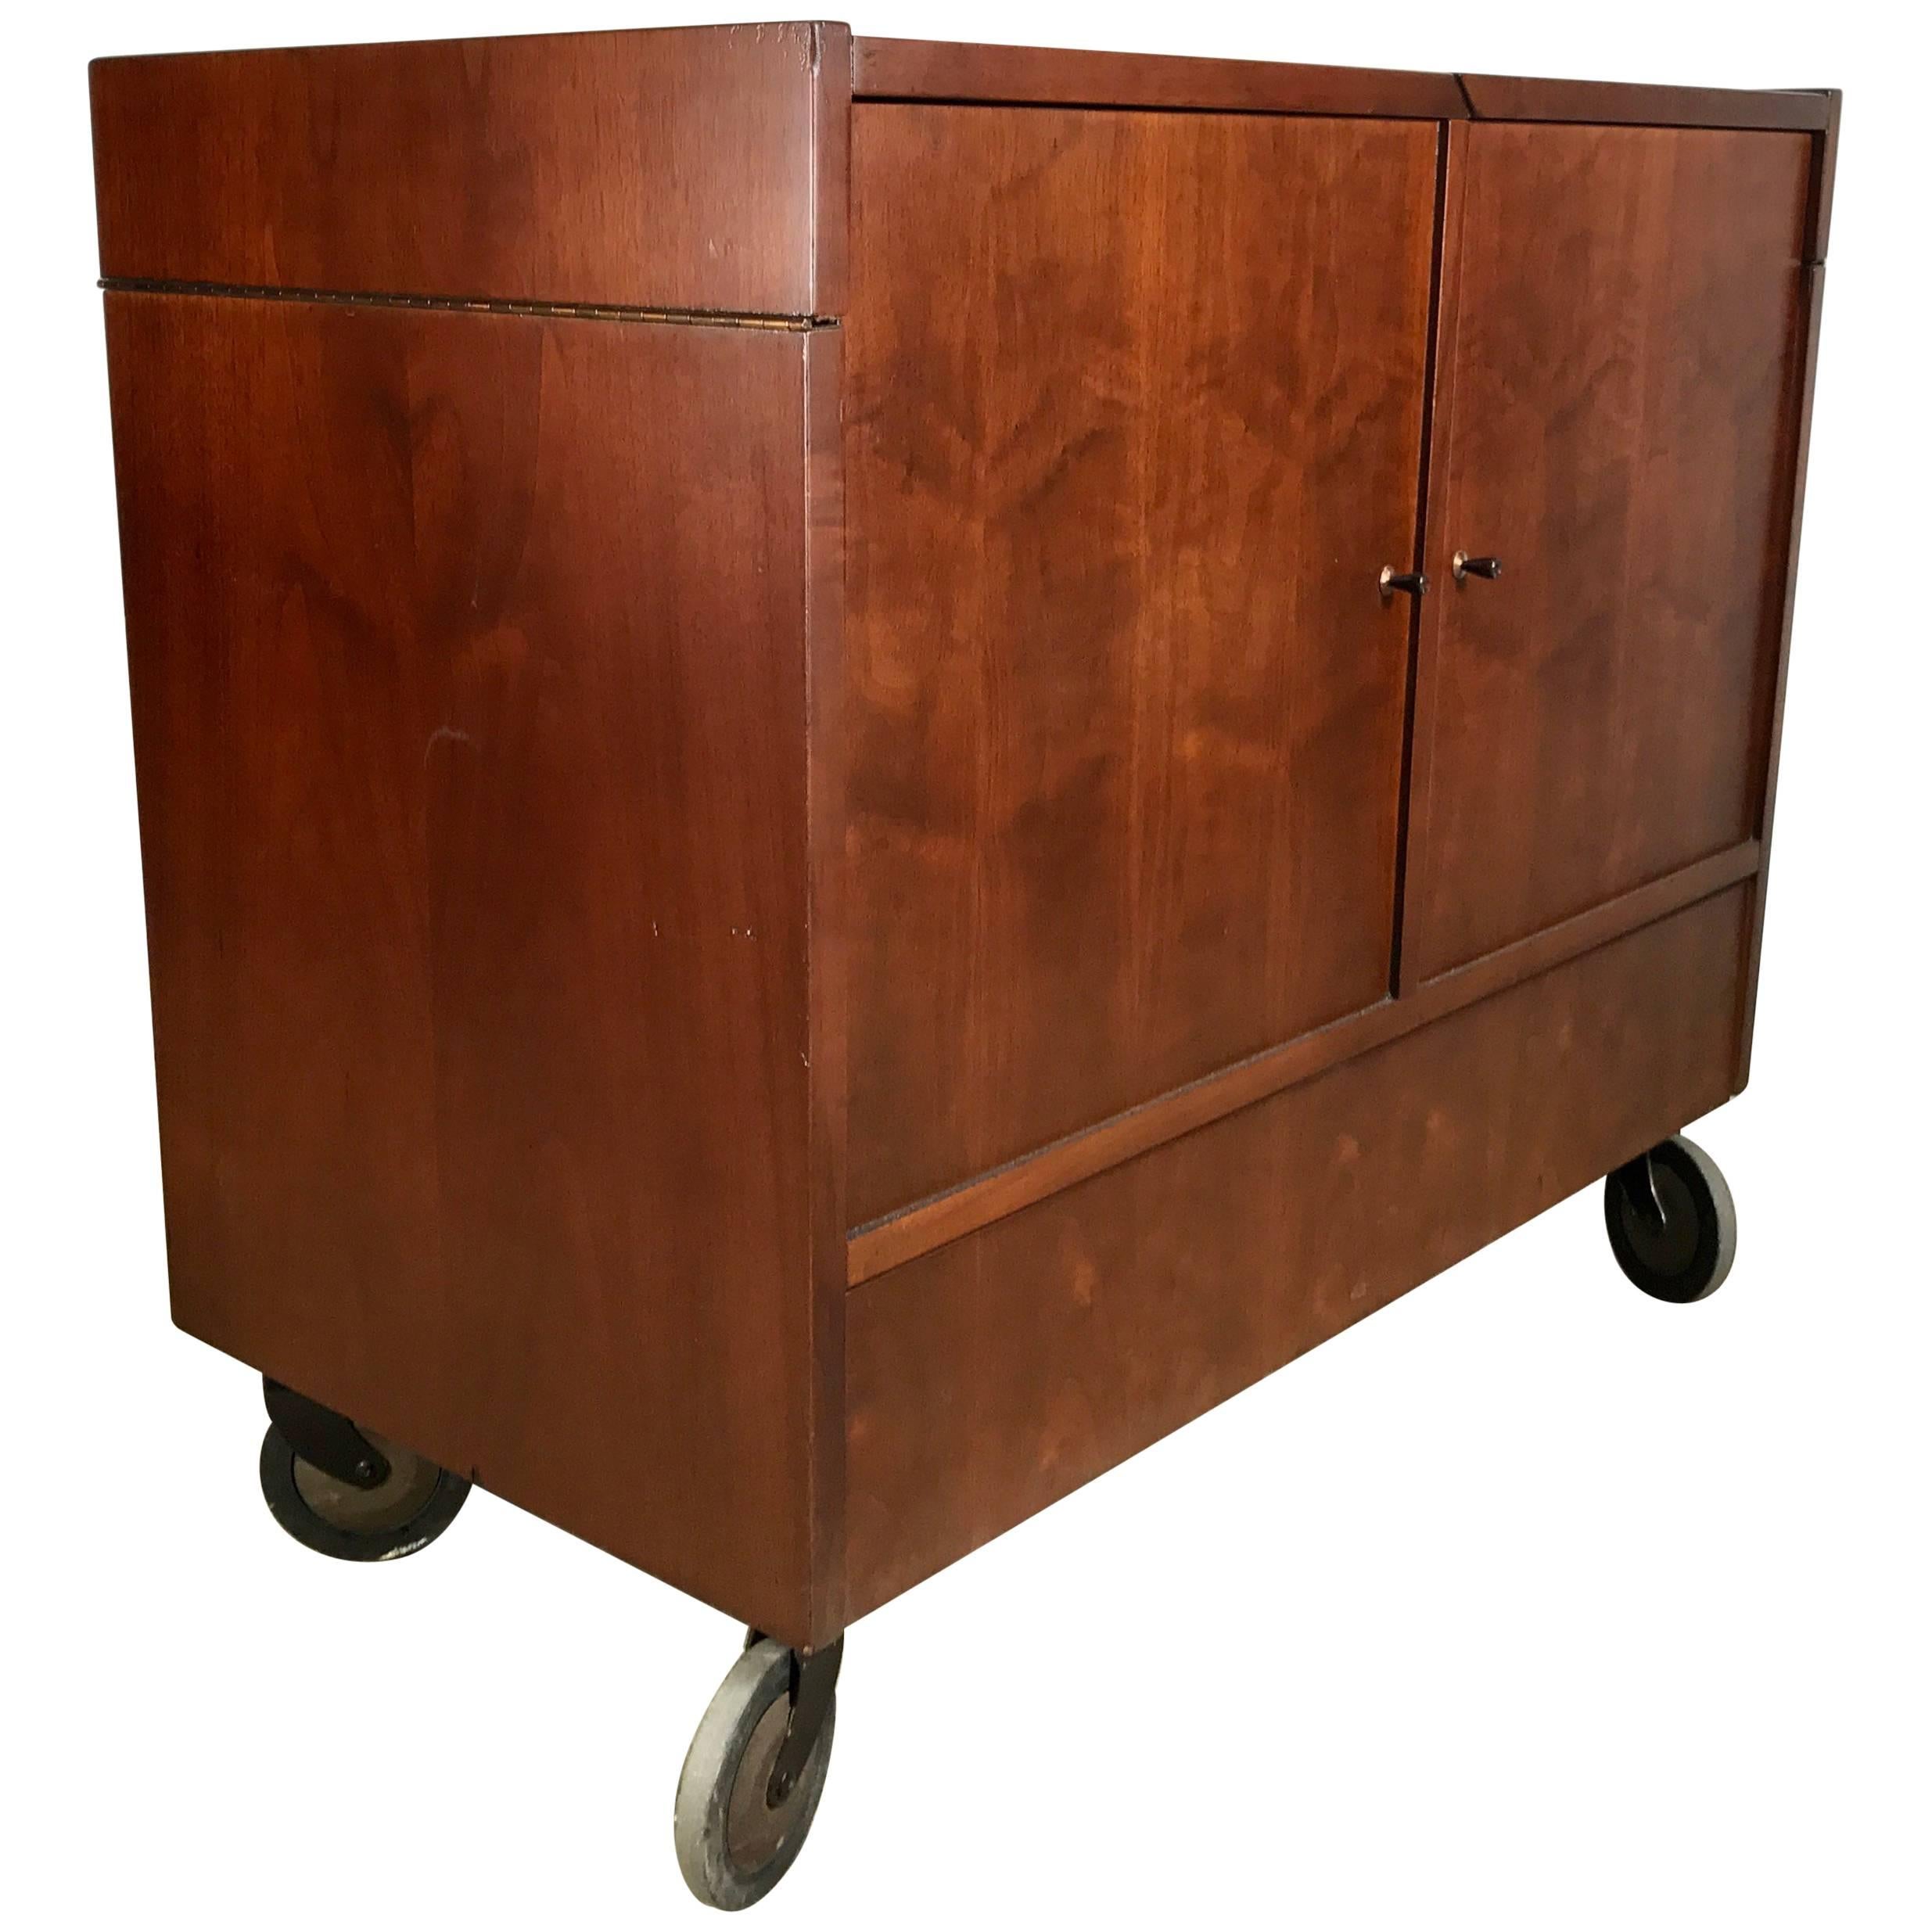 Classic Mid-Century Modern Portable Rolling Fold Out Bar Cart